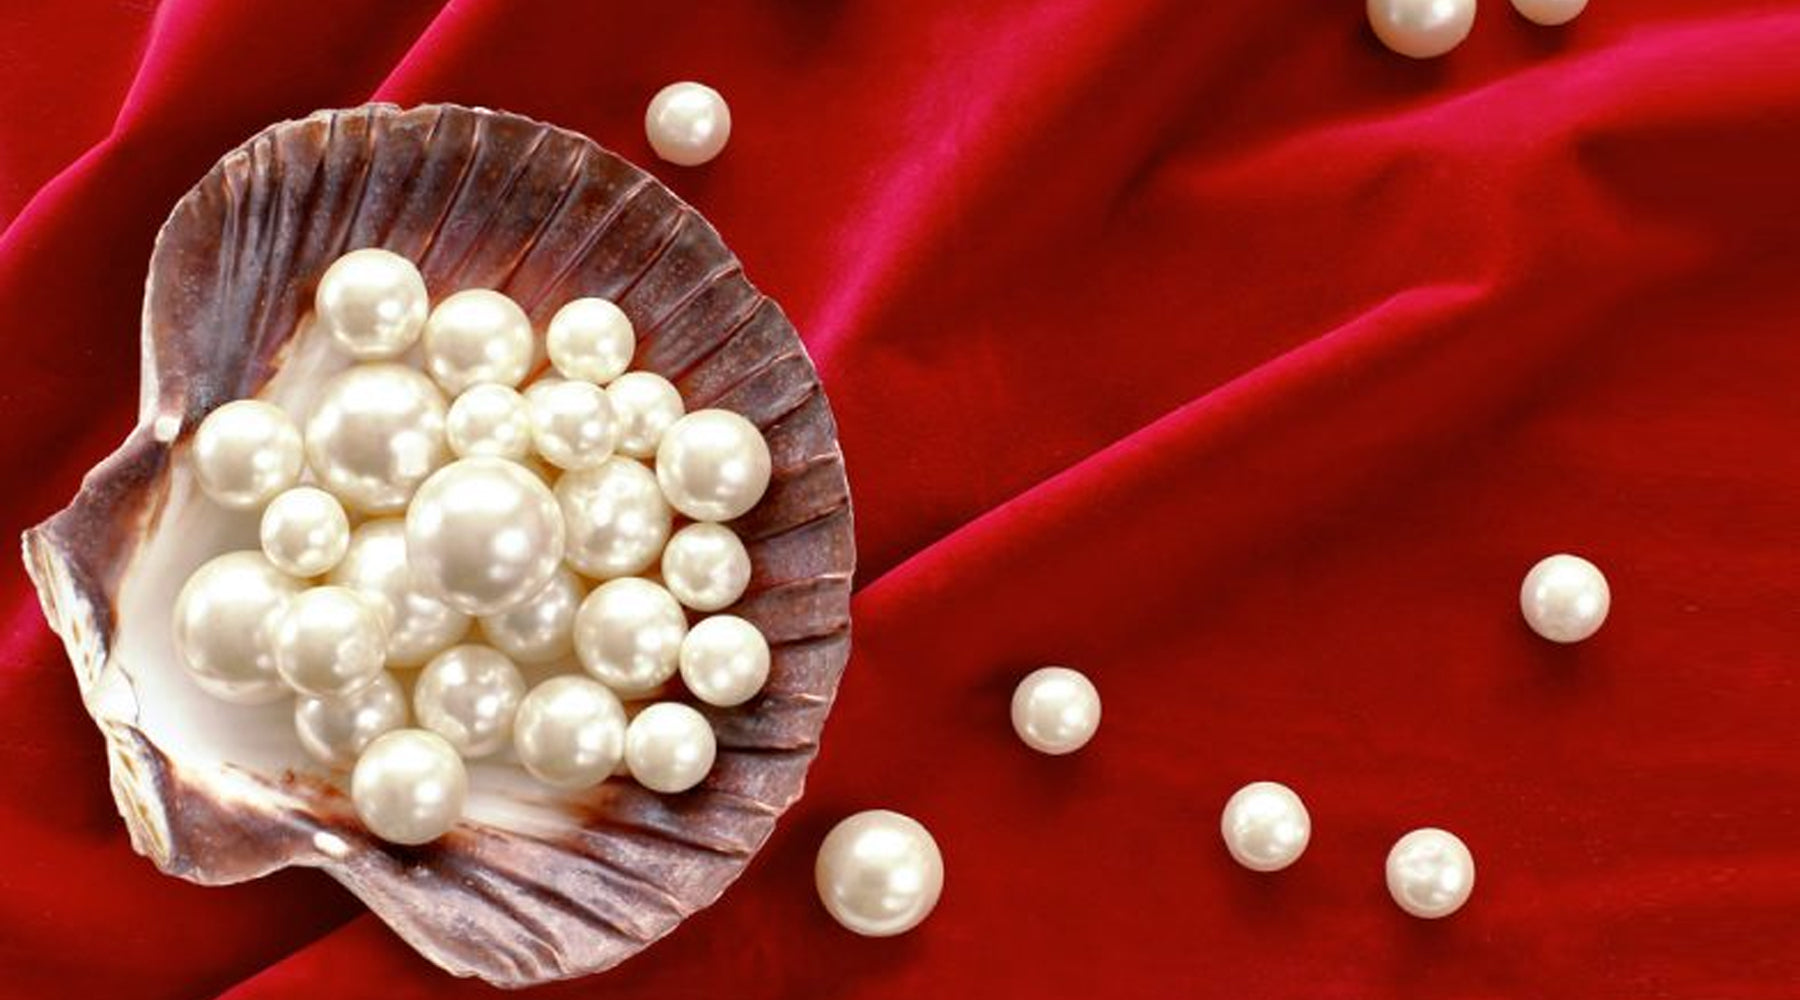 Most Commonly Asked Questions About Pearls - Answered